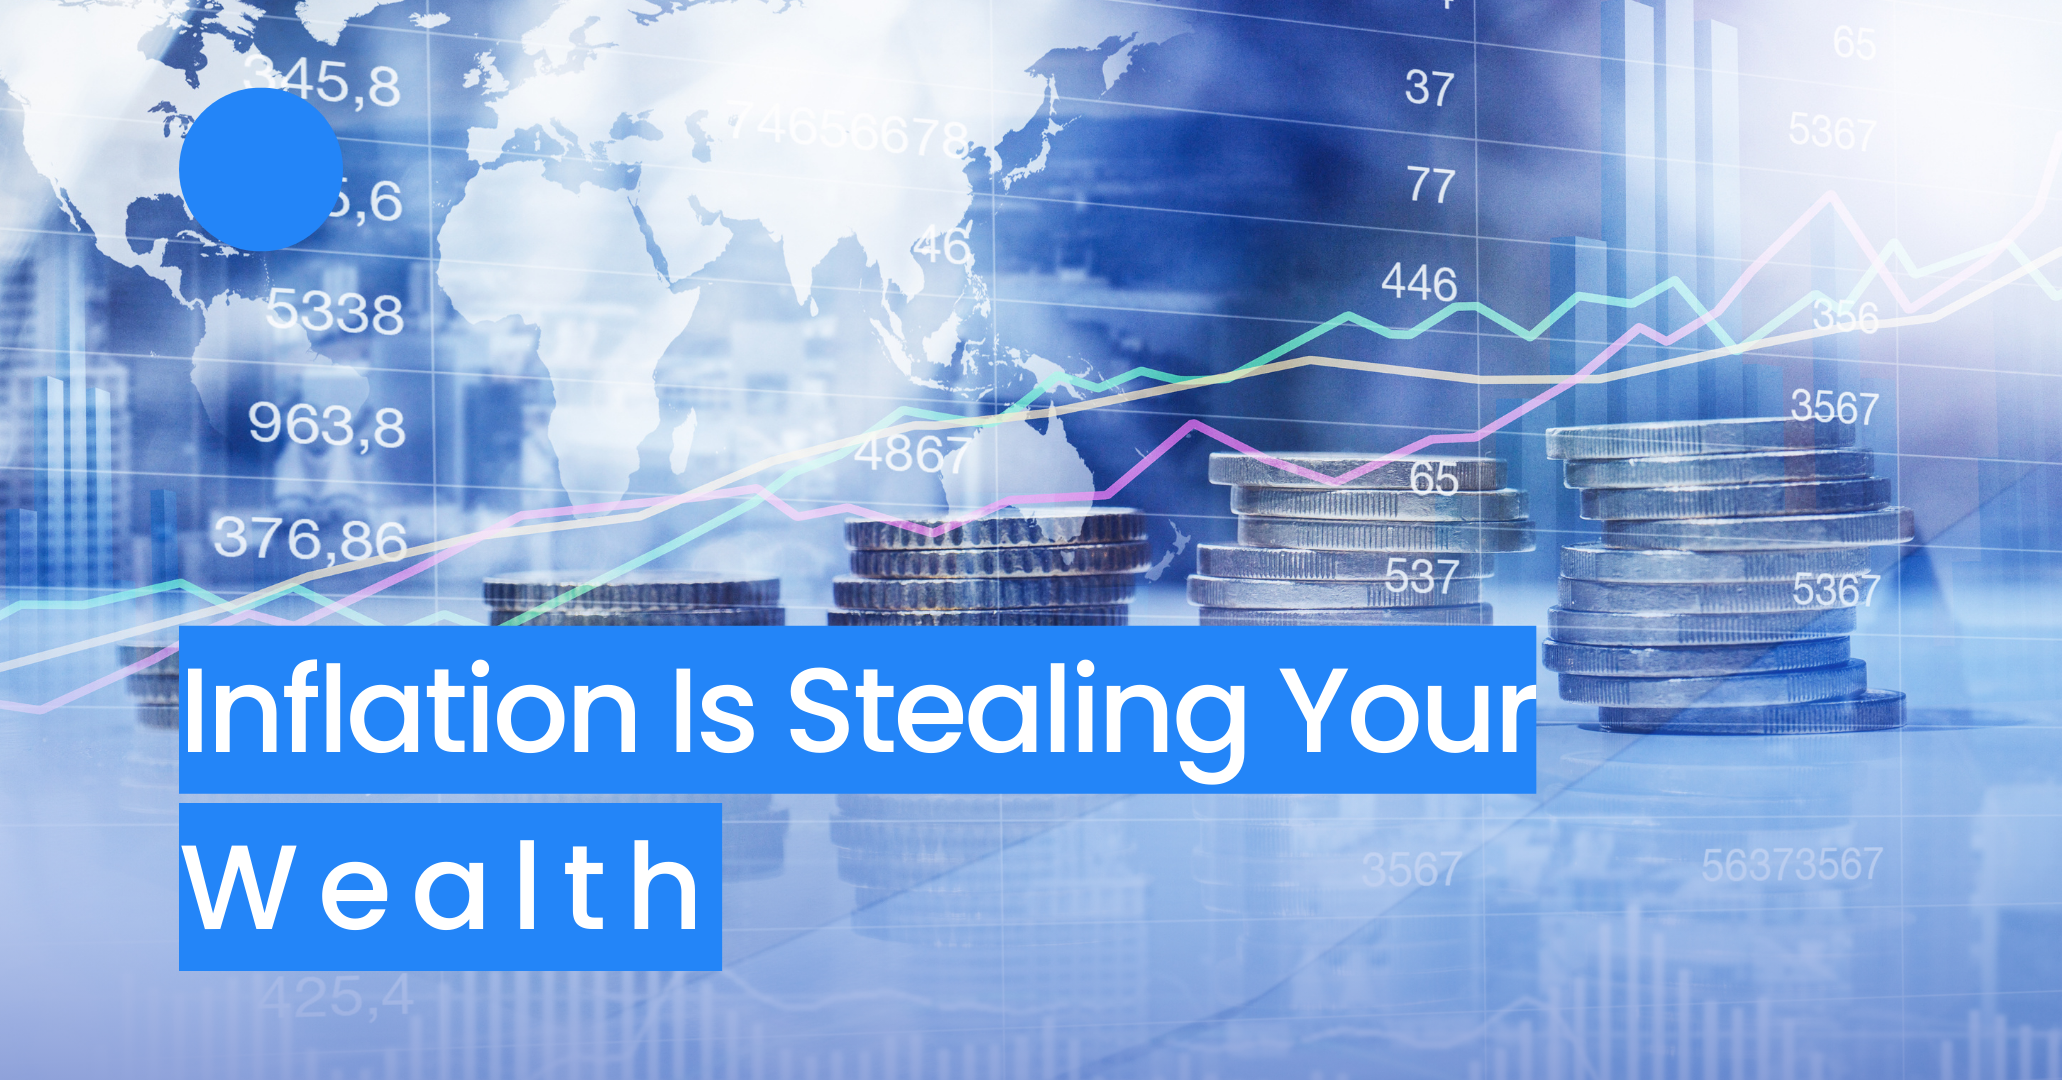 @finguru/how-inflation-is-stealing-your-wealth